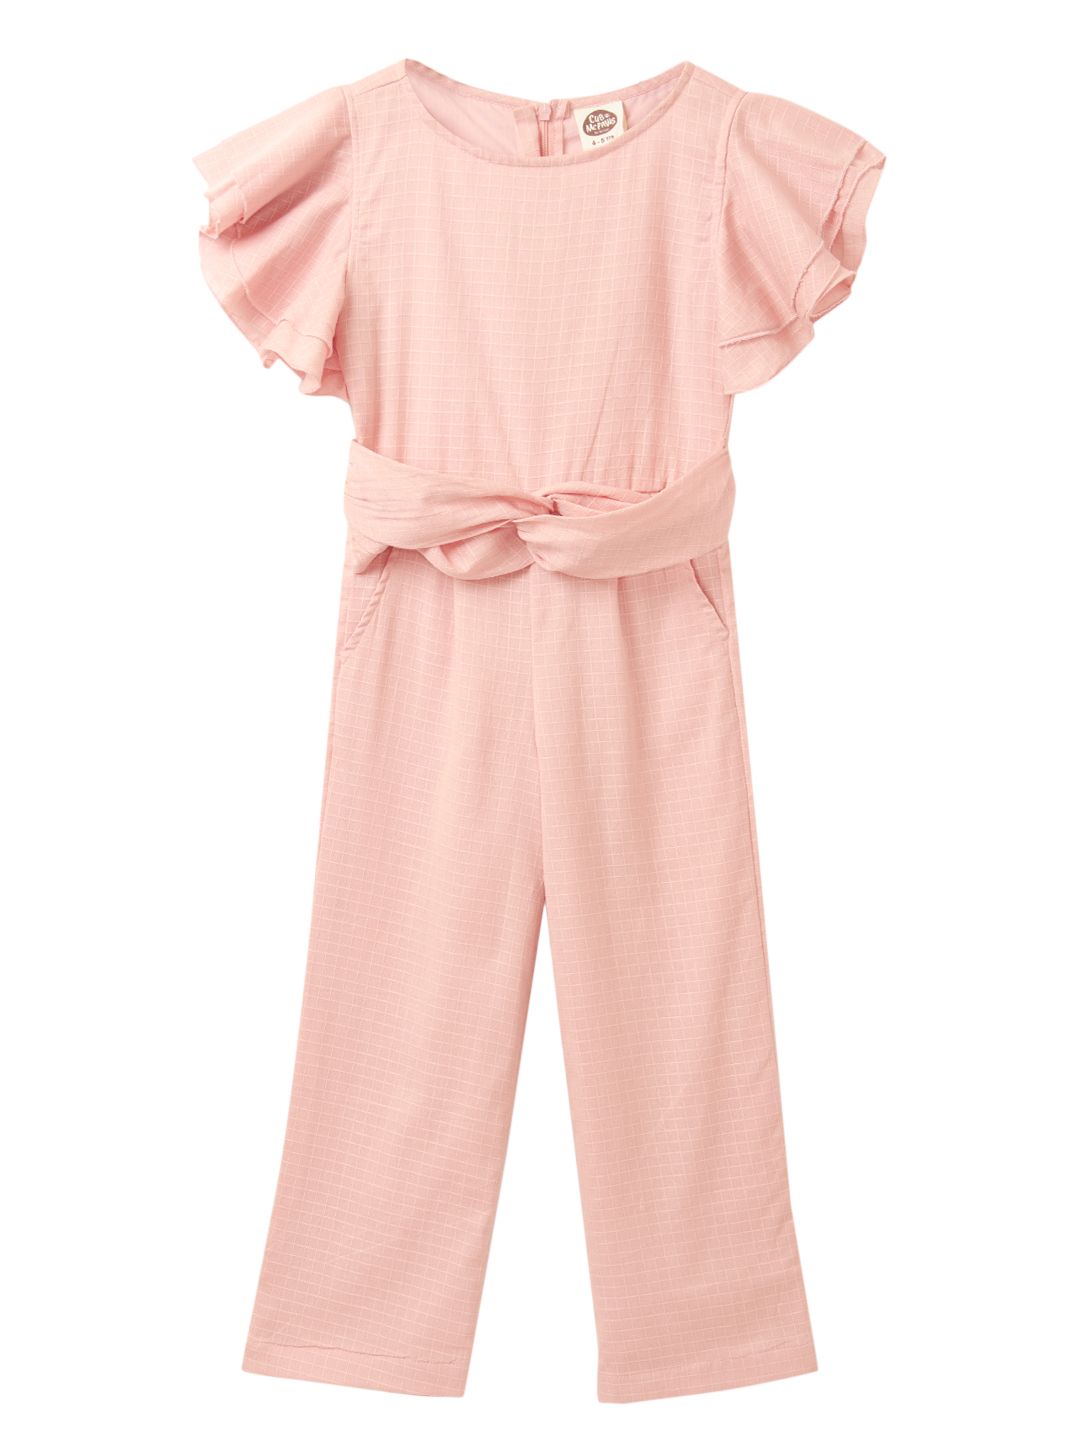 Girls Jumpsuits  Buy Girls Jumpsuits Online Starting at Just 115  Meesho